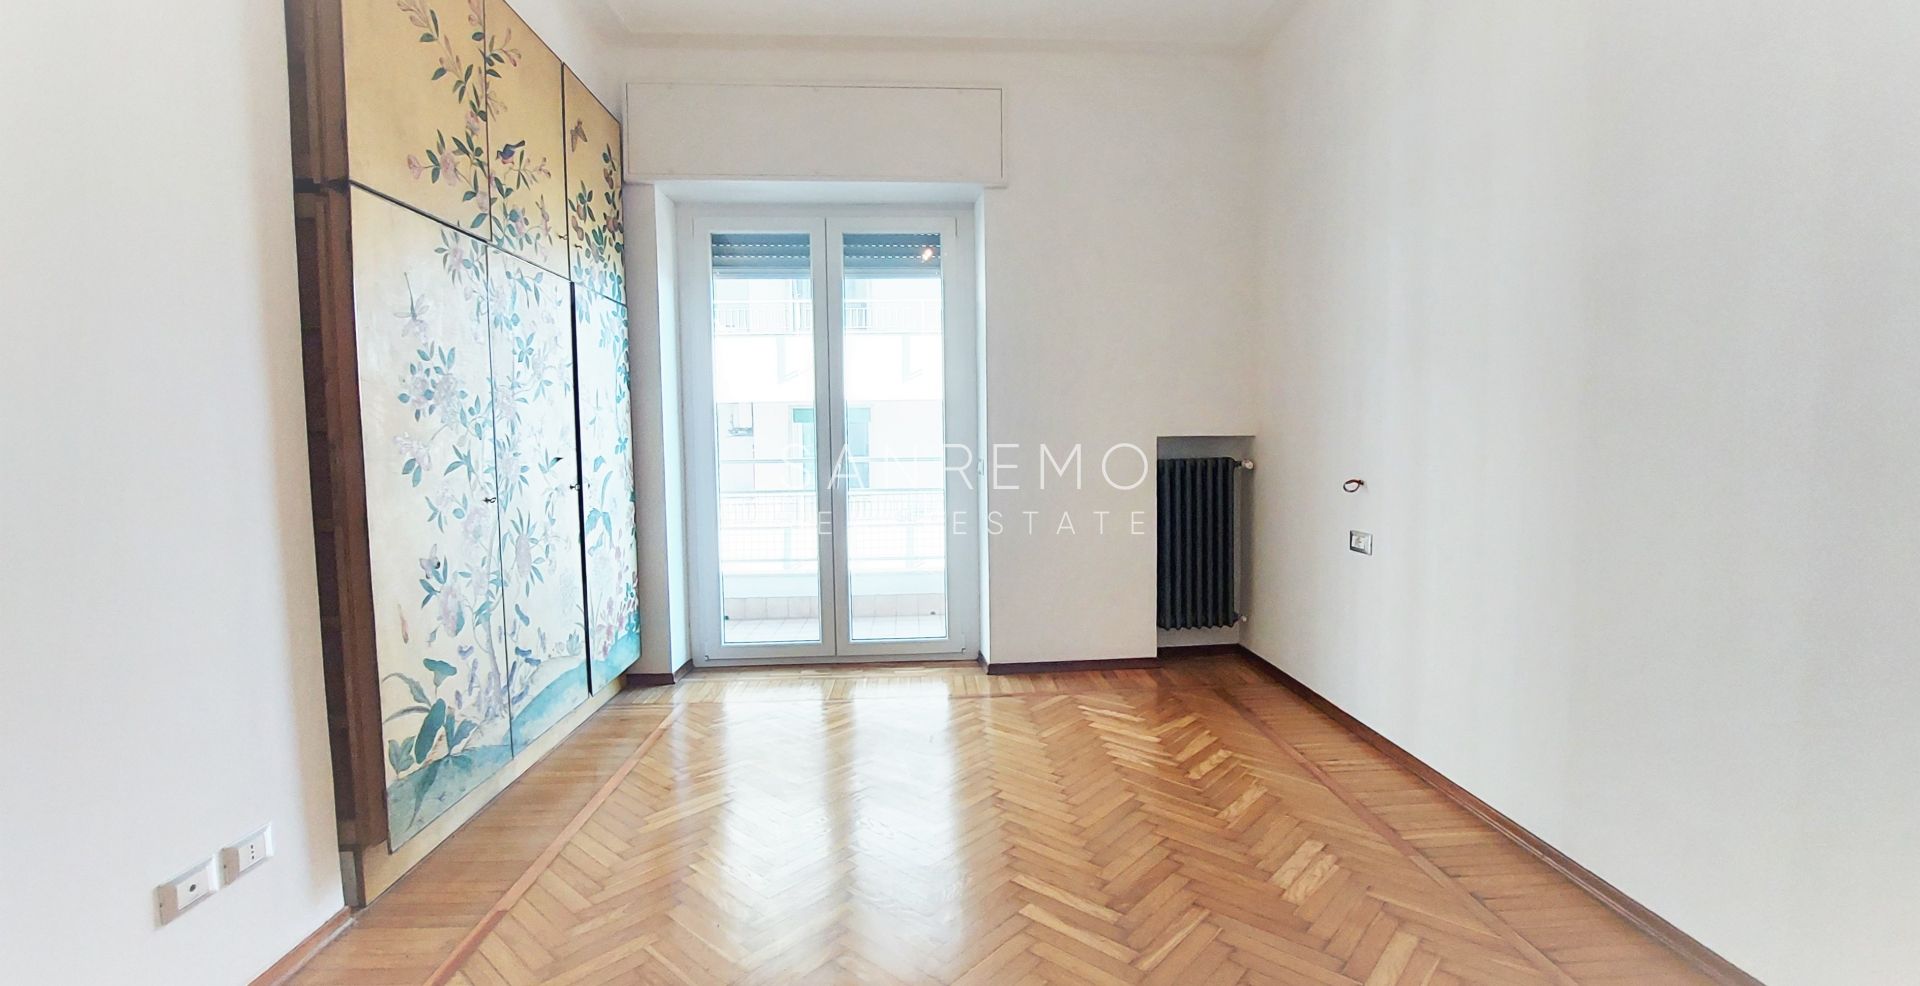 3 bedroom flat with sea view in the city of Sanremo